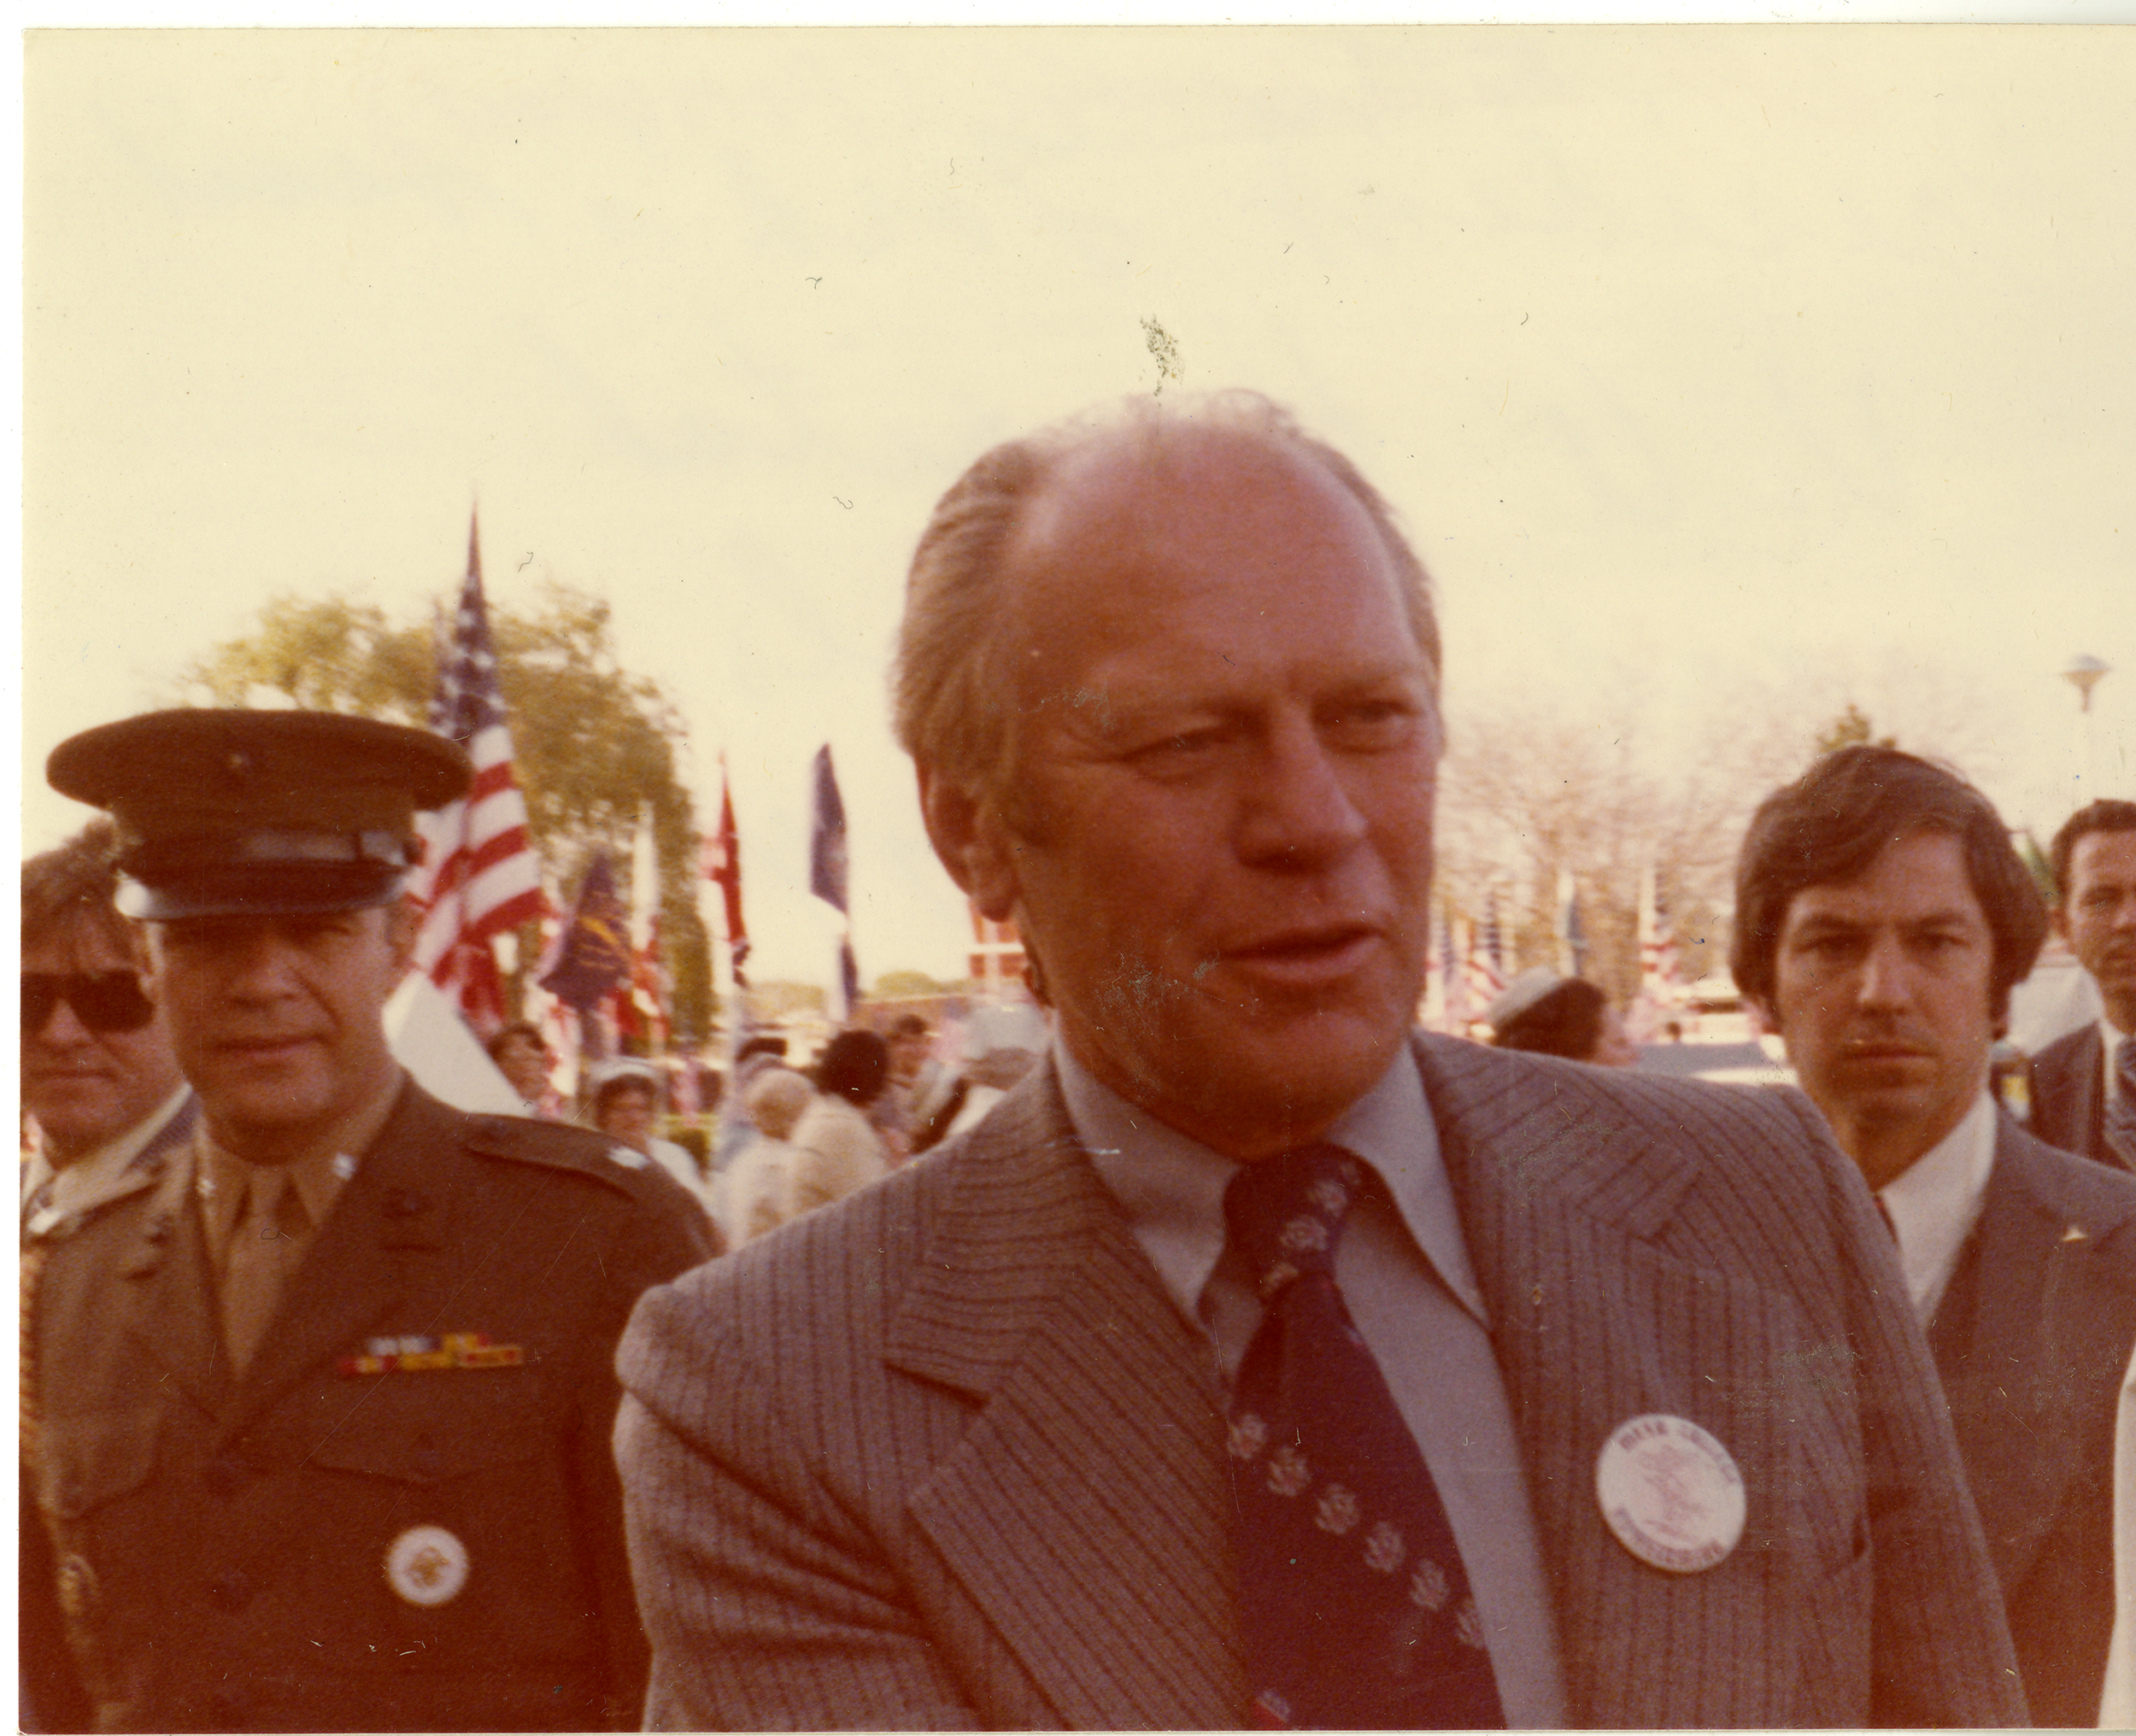 Gerald Ford, wearing a suit and a button, stands with military personnel.